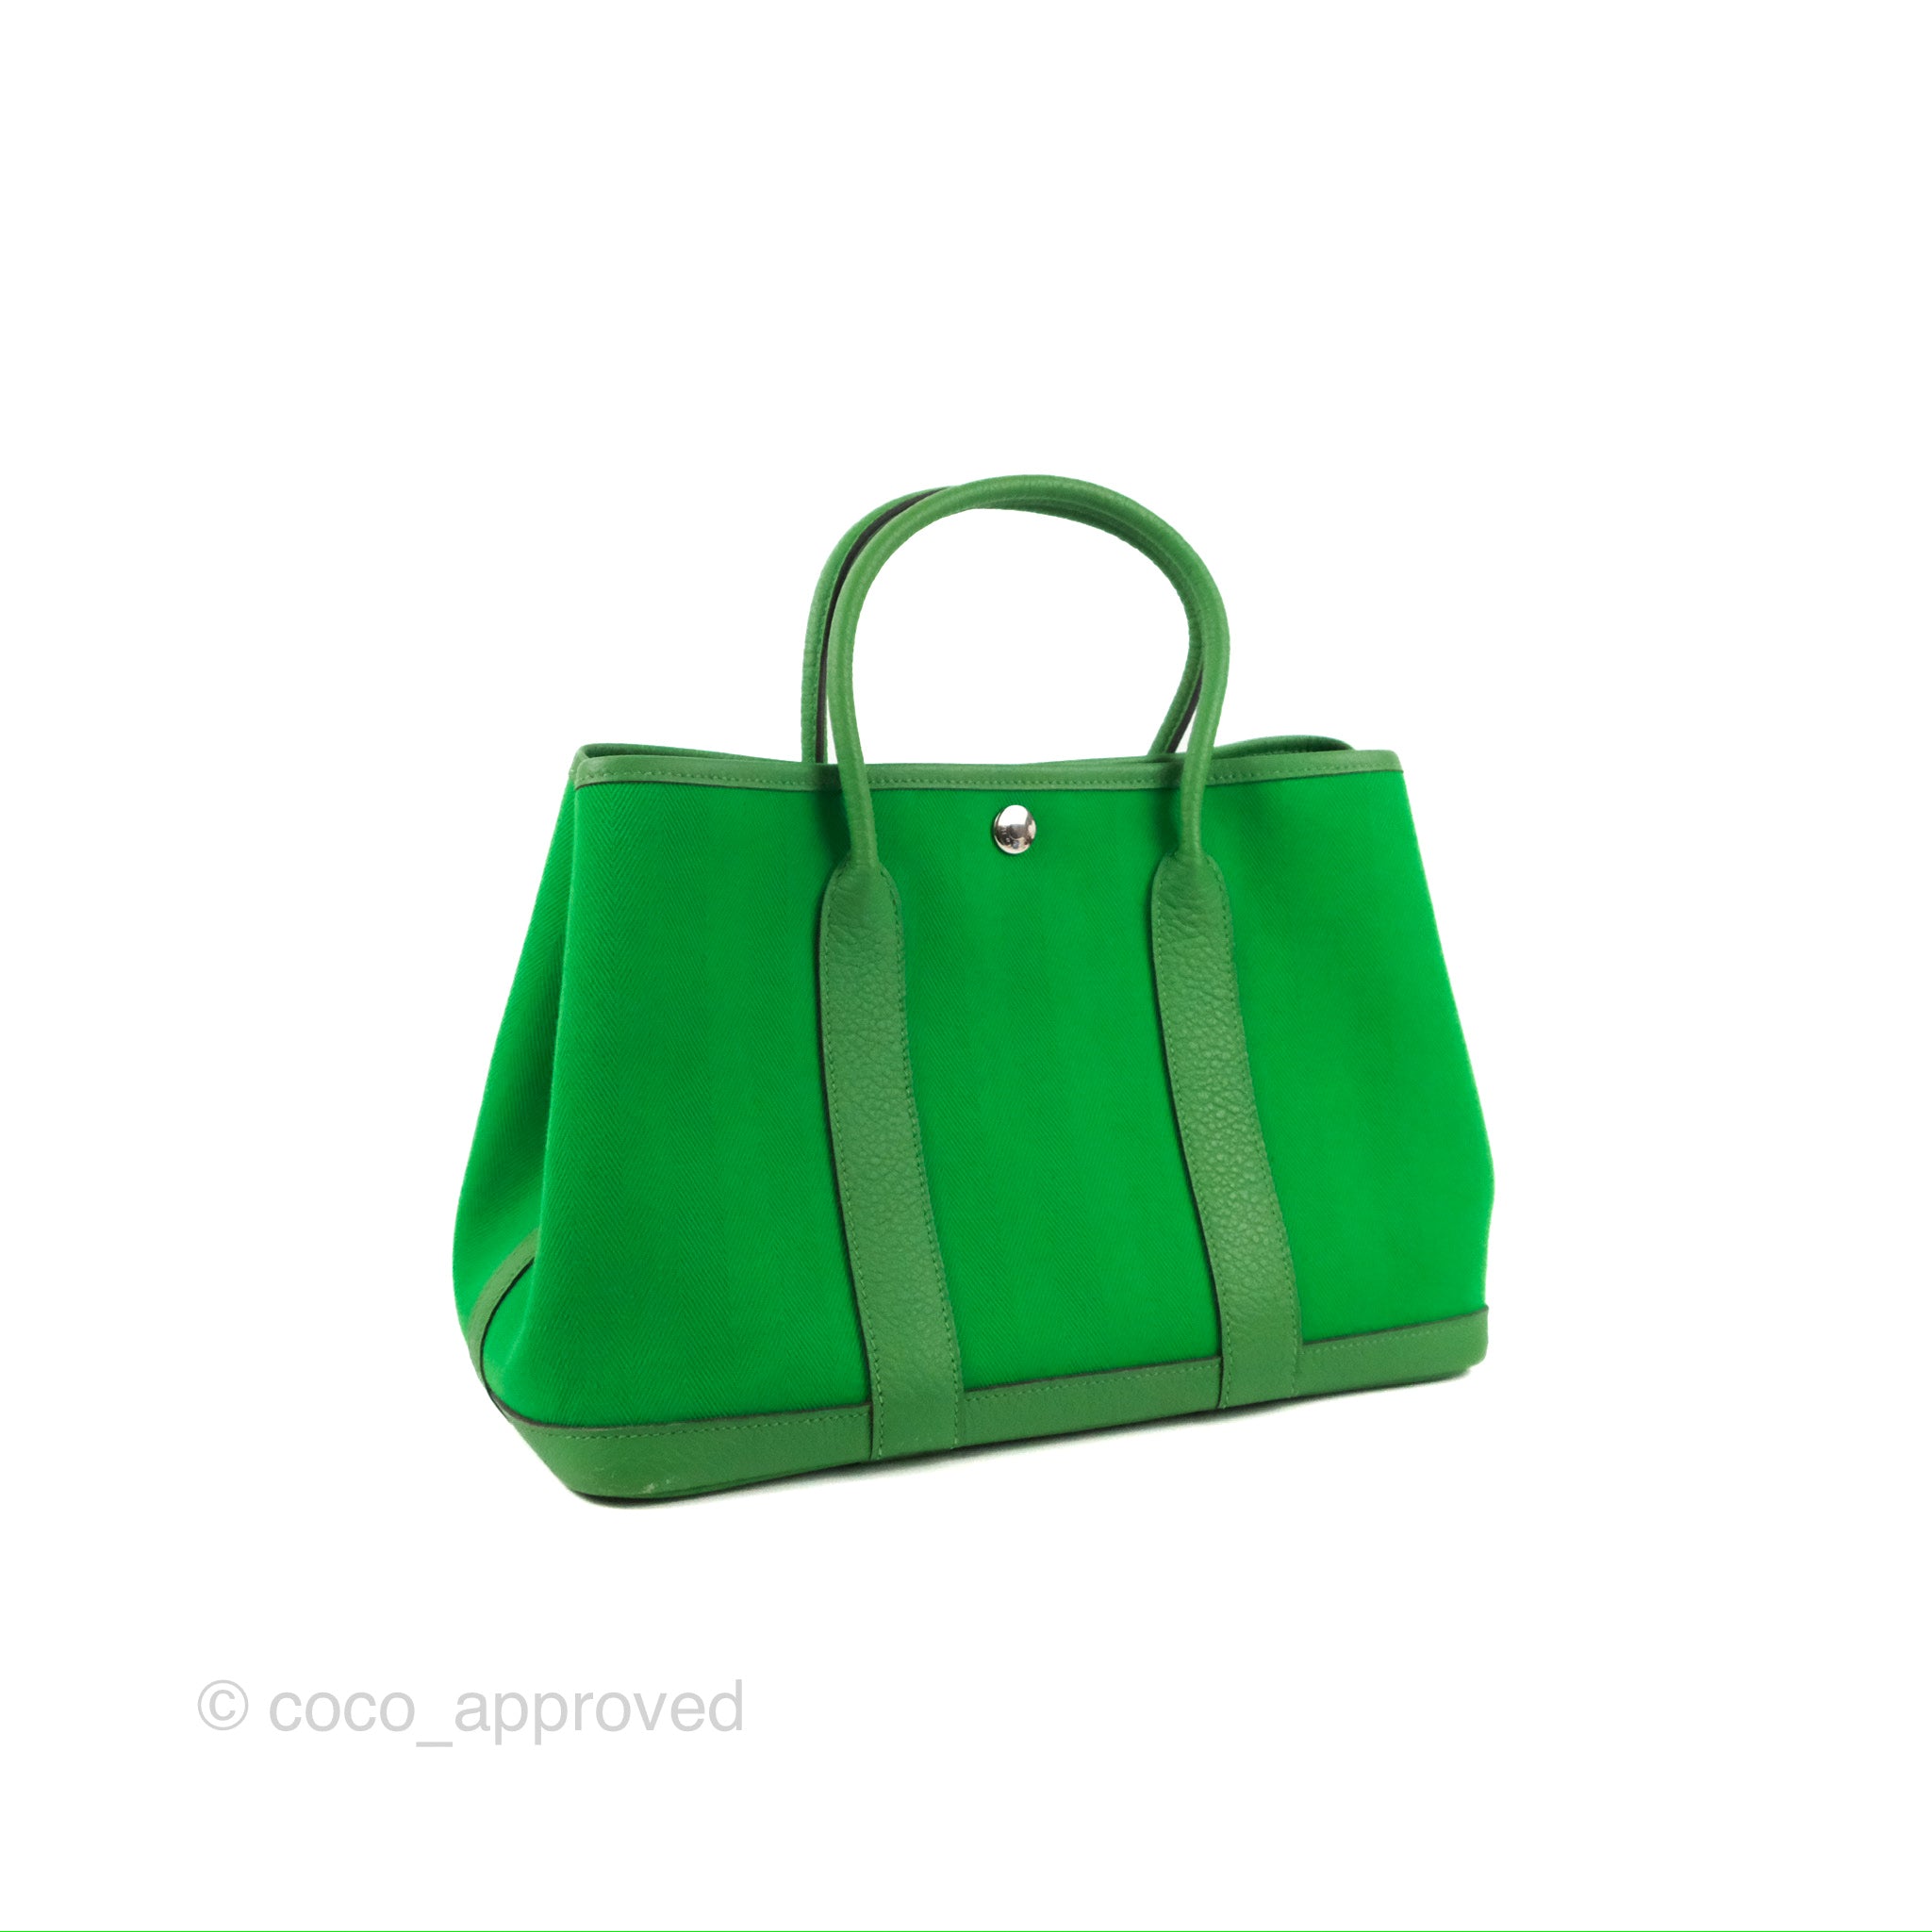 Hermès Garden Party Leather Tote Bag